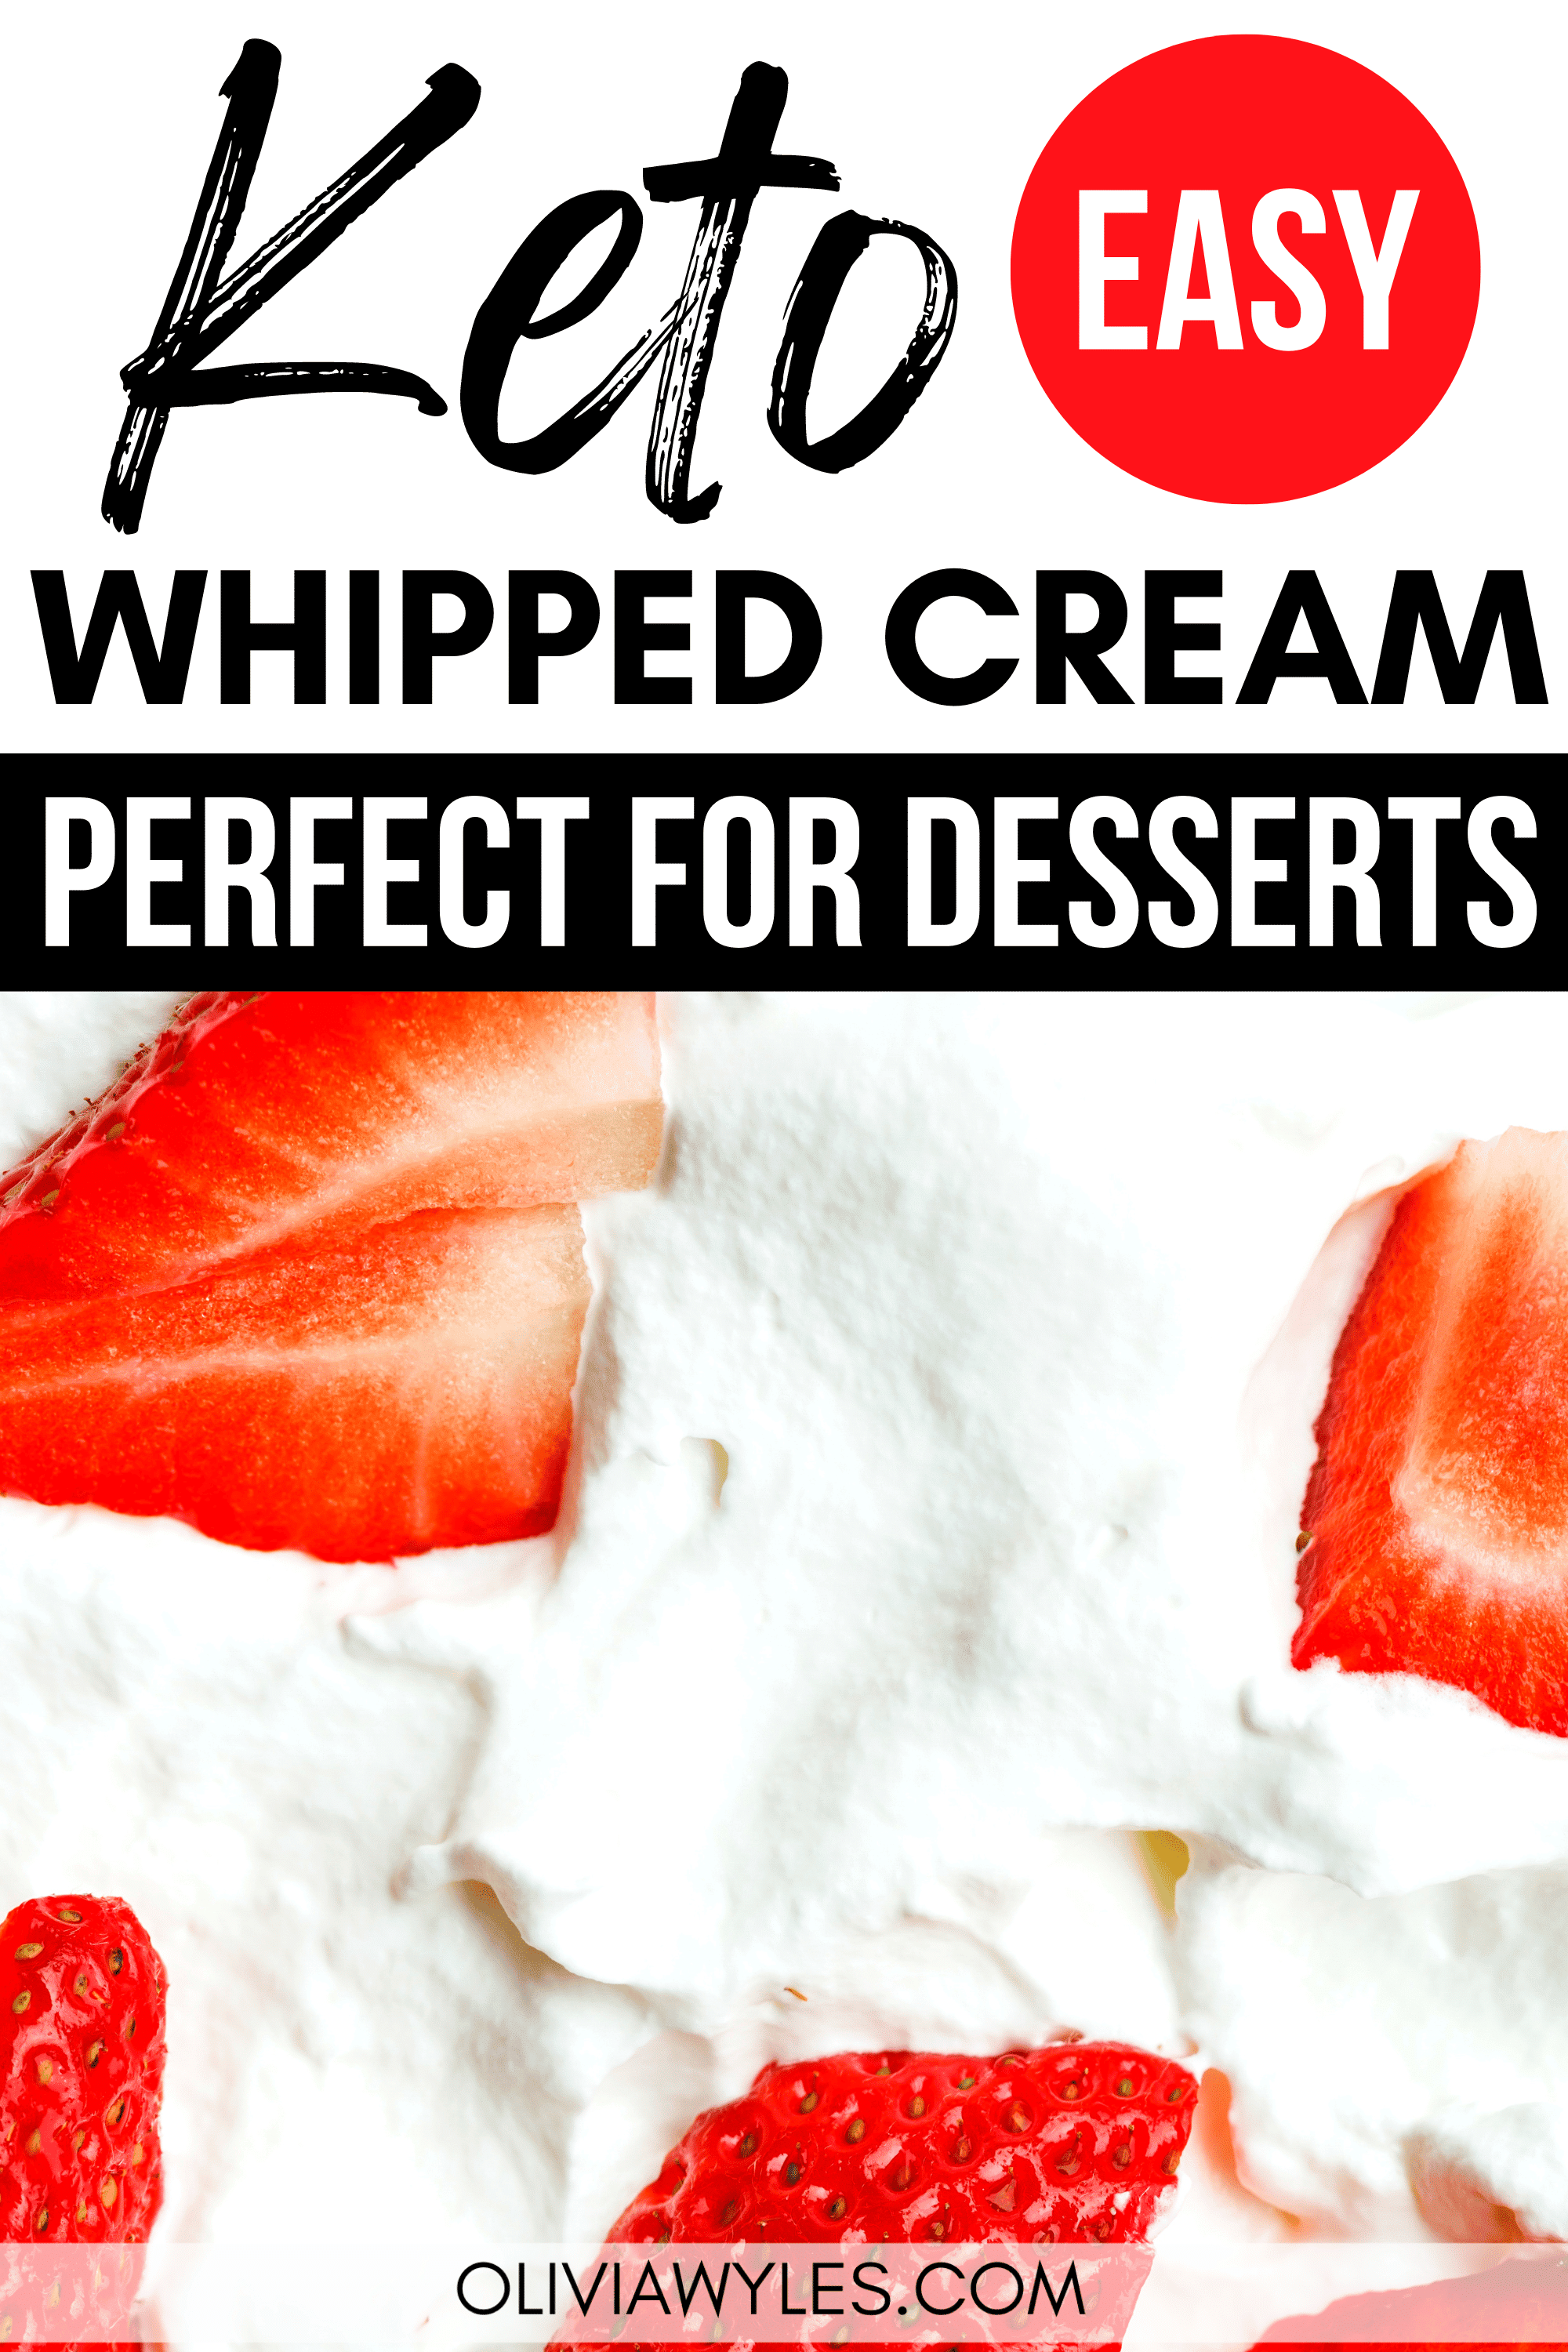 whipped cream and strawberries Pinterest pin image